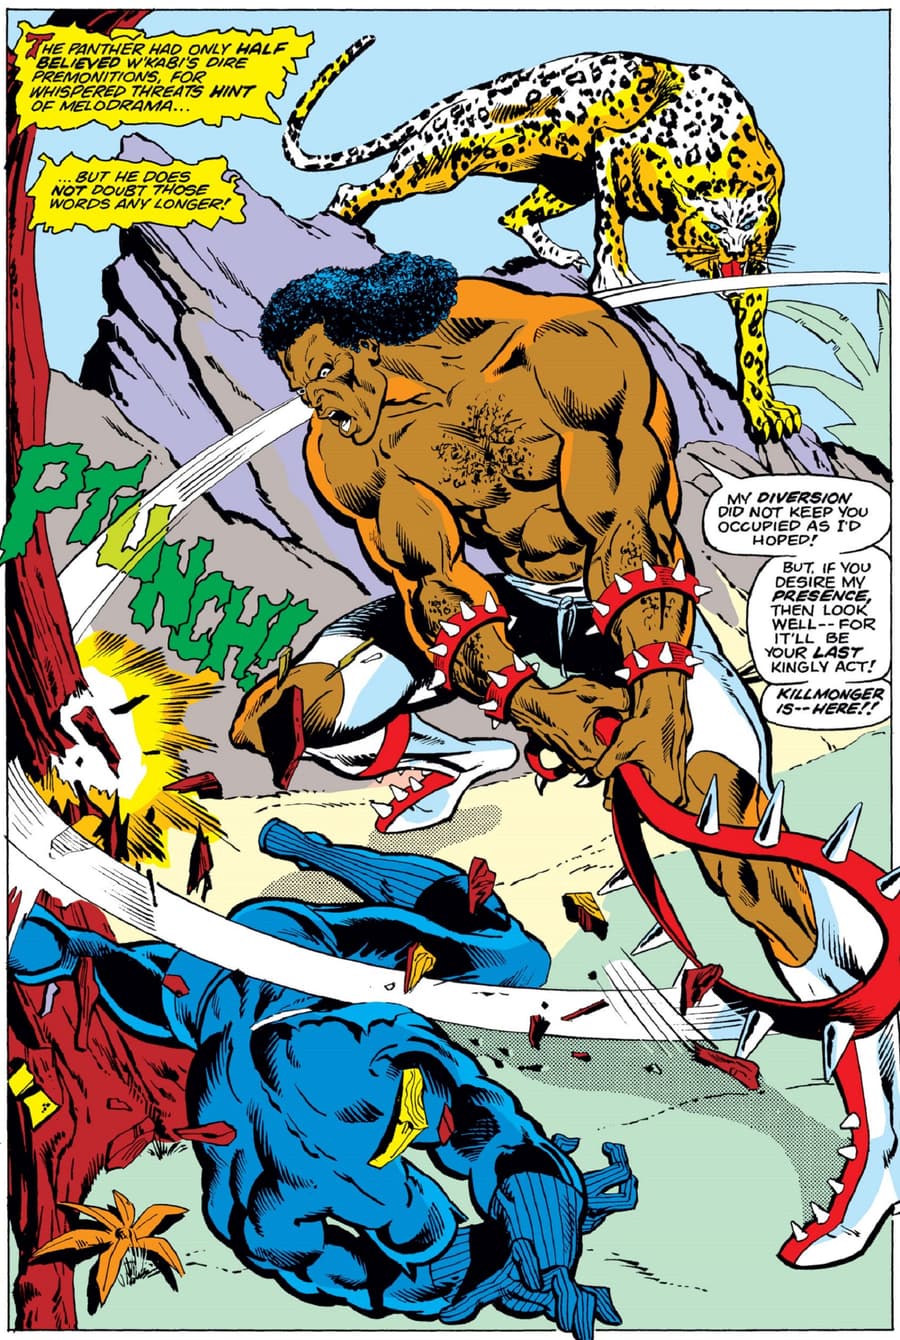 The first appearance of Killmonger in JUNGLE ACTION (1972) #6 by Don McGregor, Rich Buckler, and Klaus Janson.